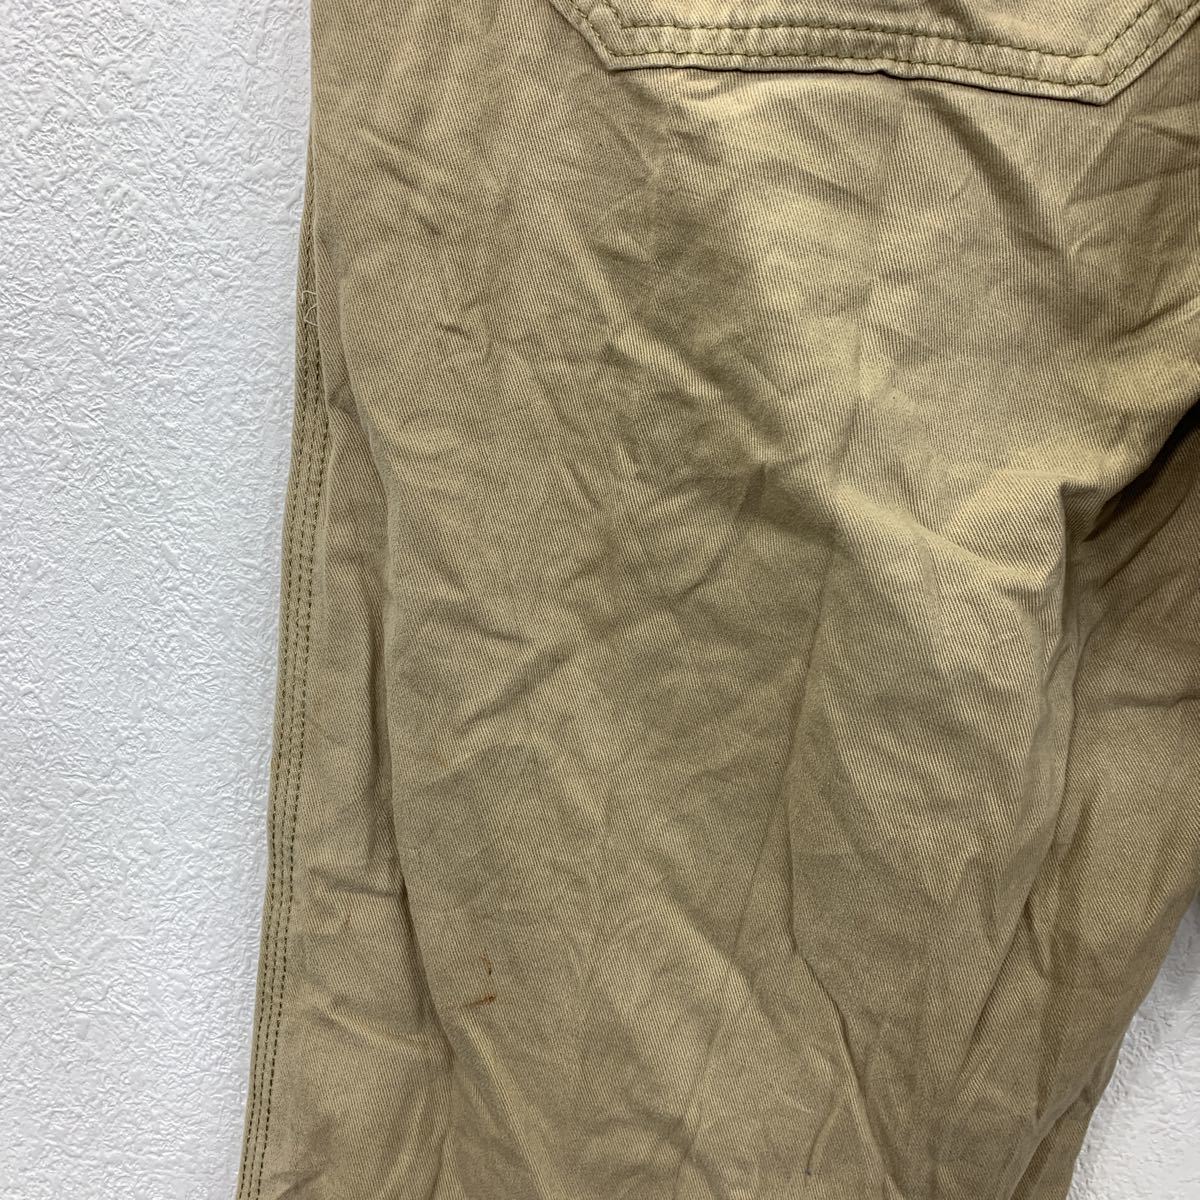 OLDNAVY chino pants W36 Old Navy beige lining red check old clothes . America buying up 2305-131